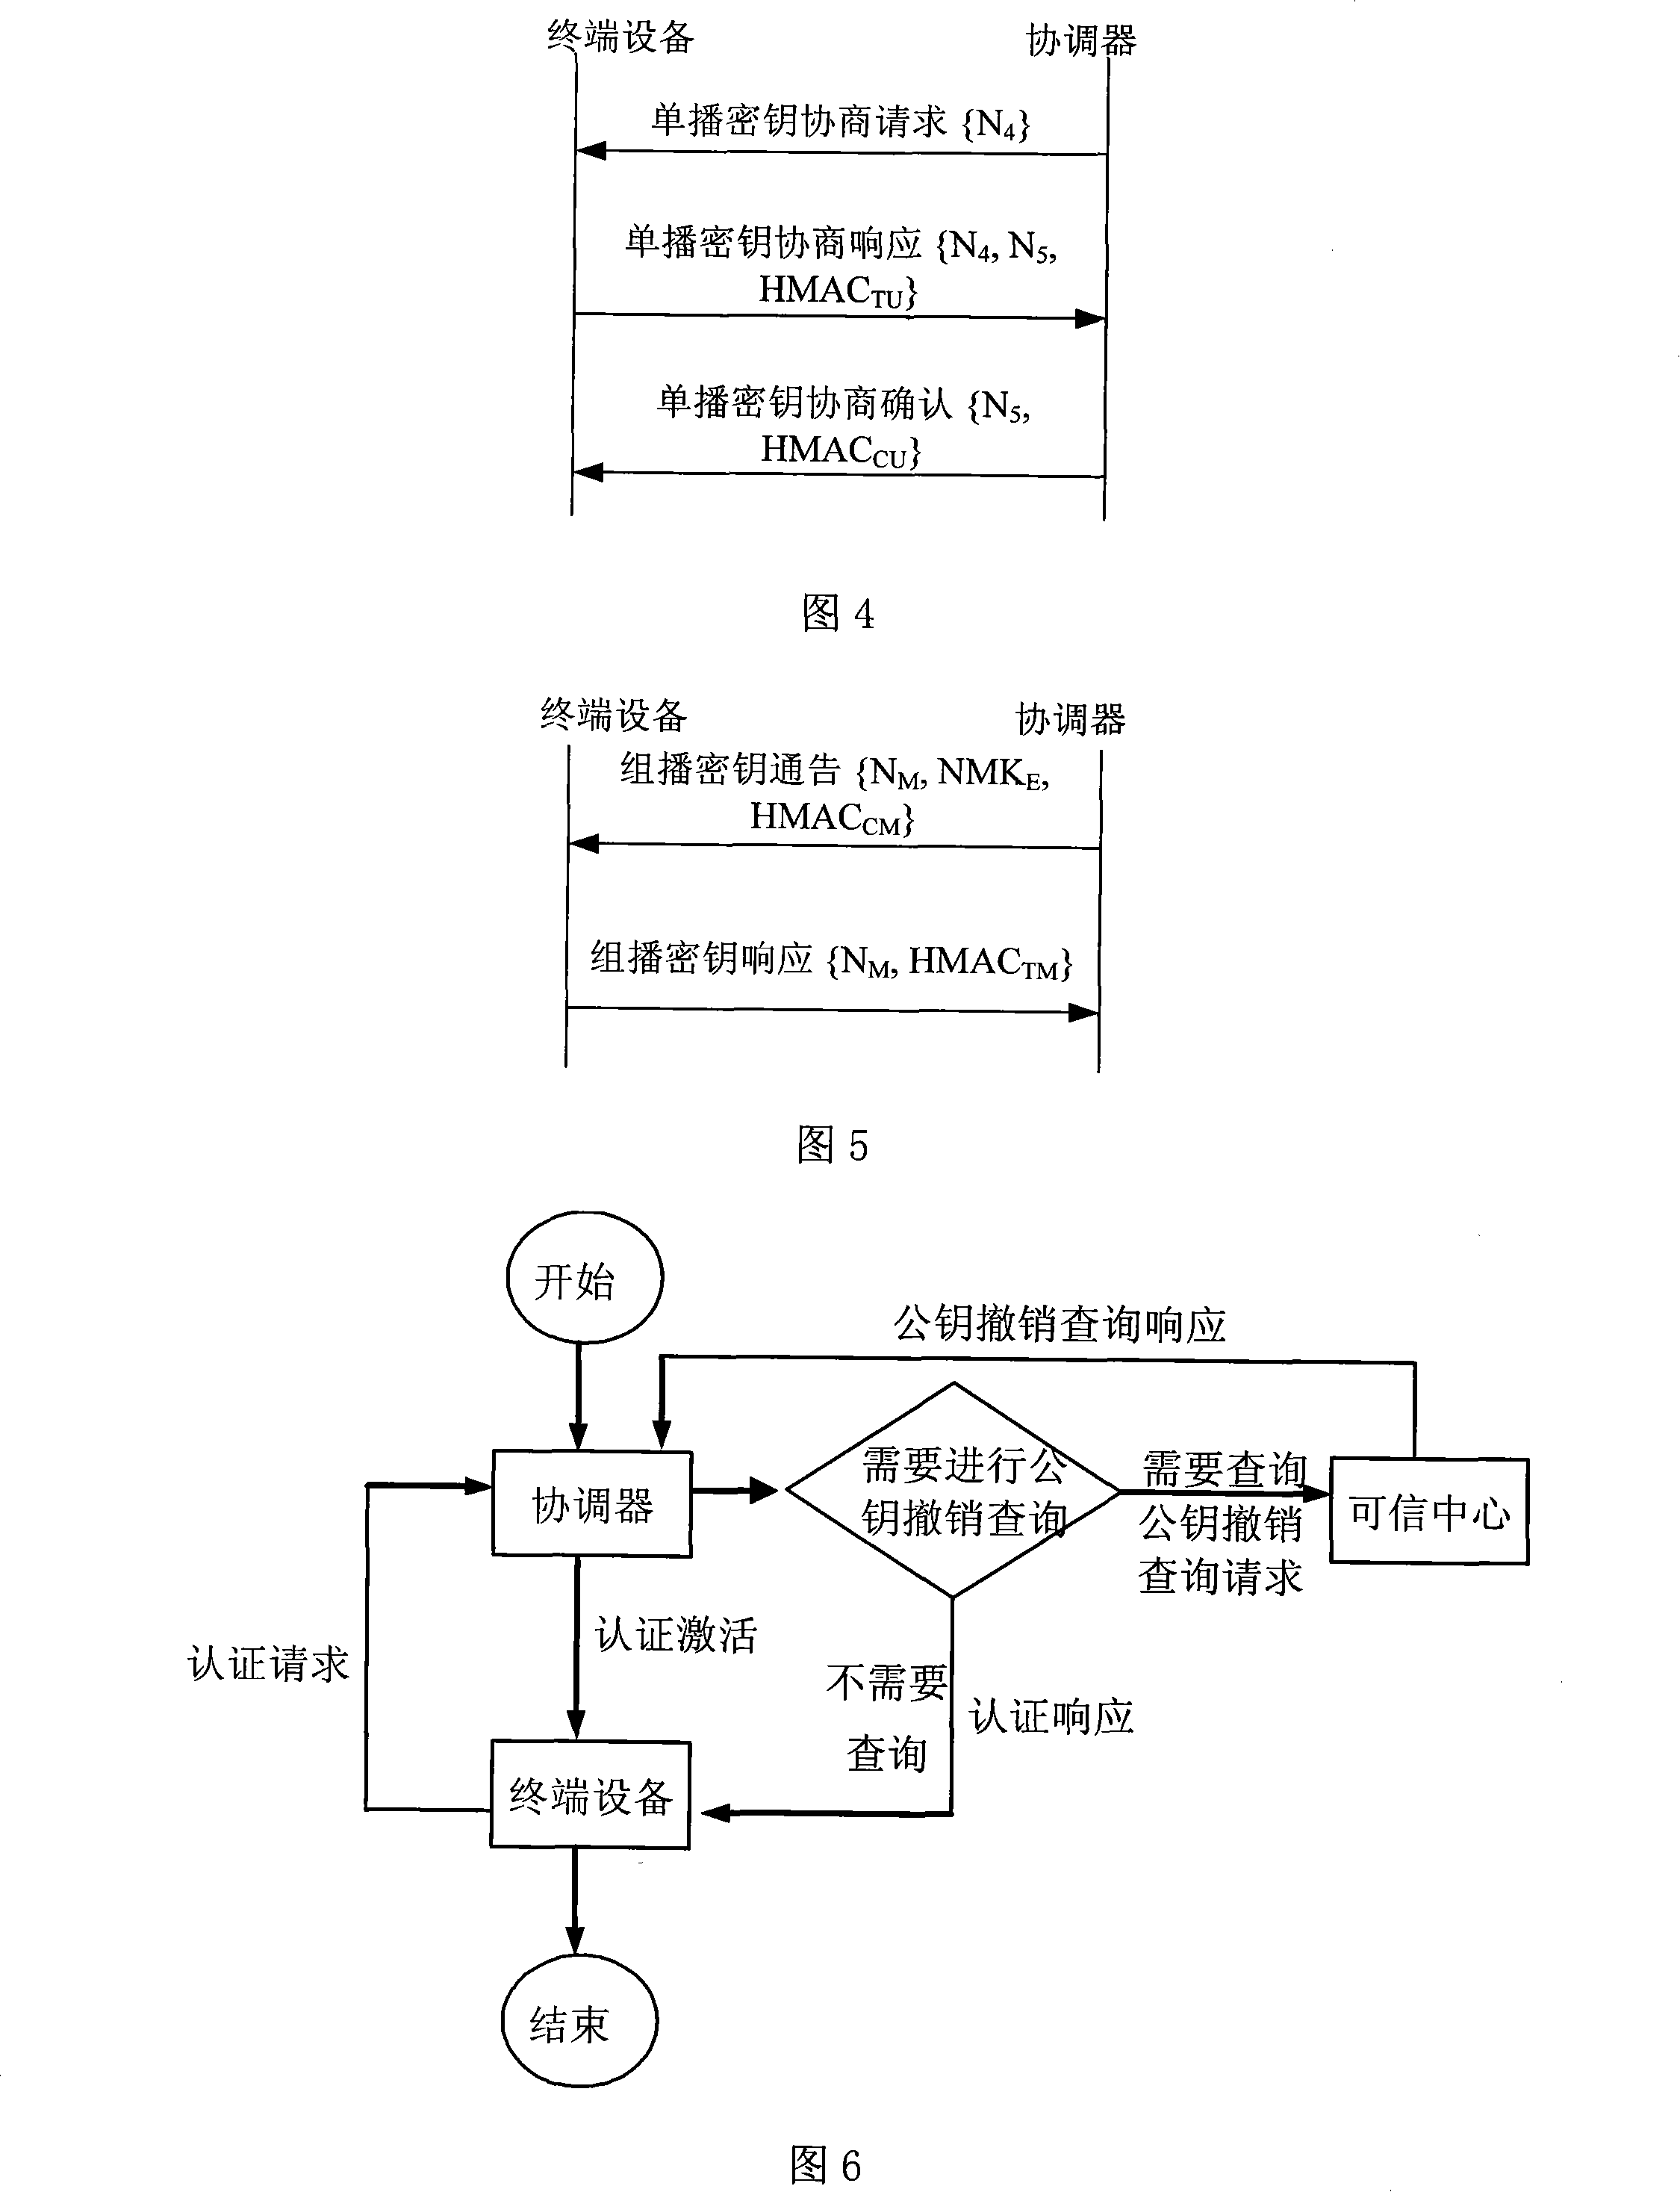 Wireless multi-hop network authentication access method based on ID